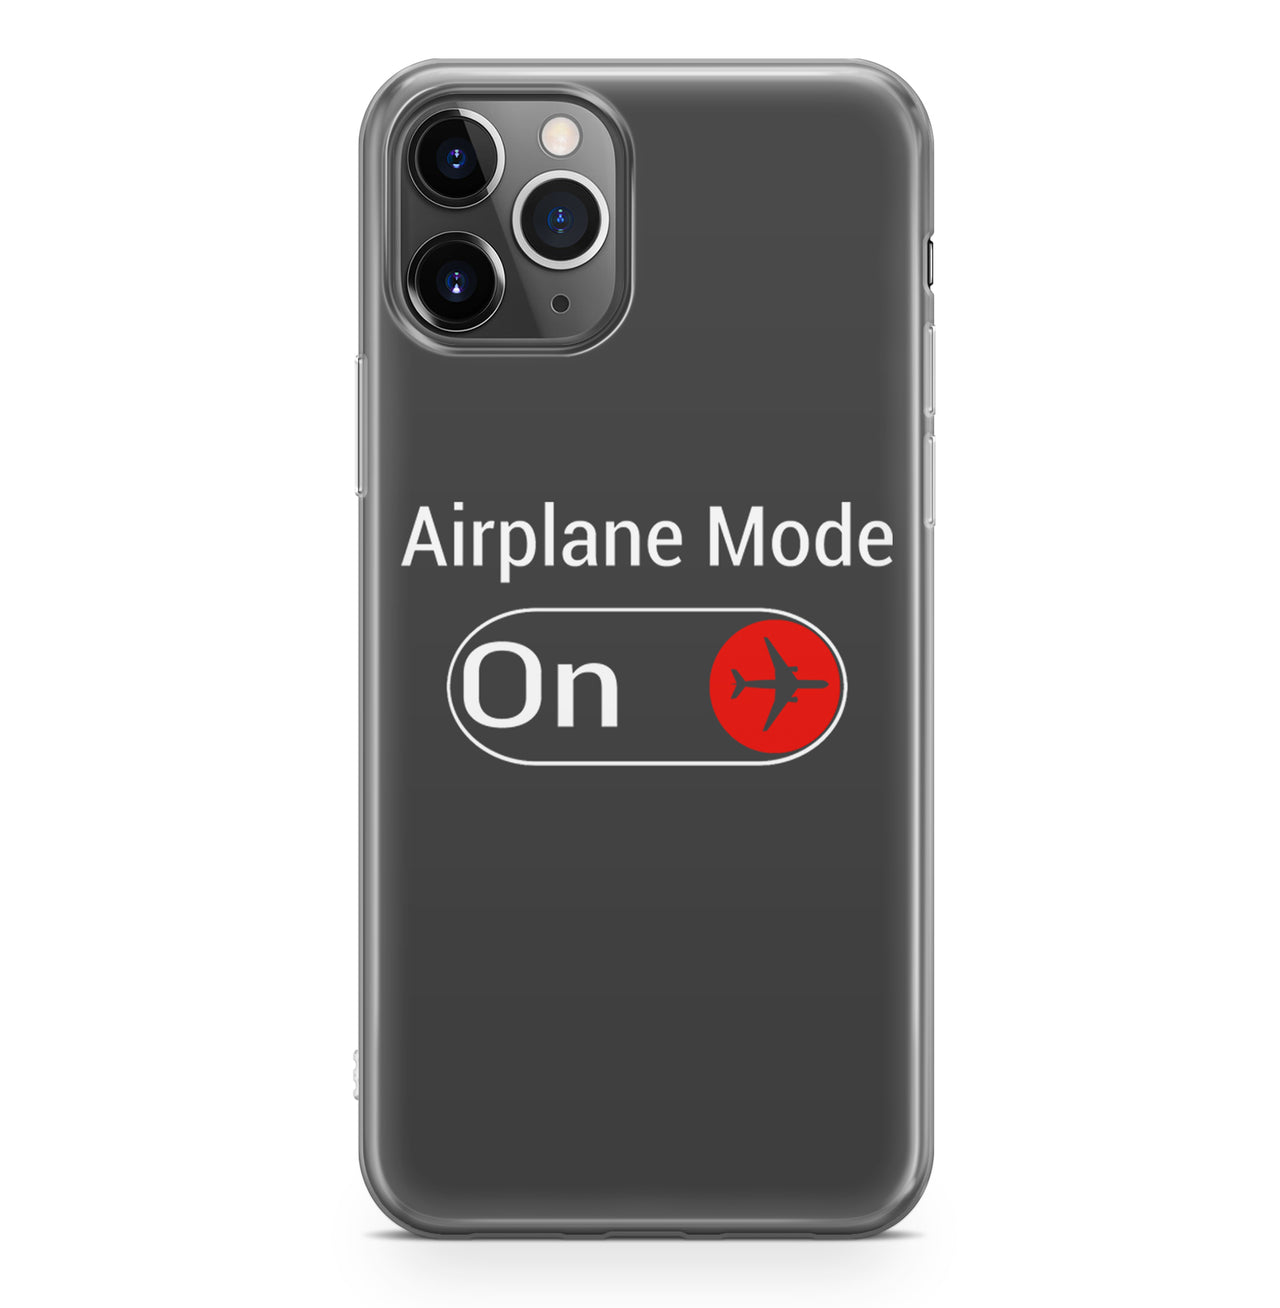 Airplane Mode On Designed iPhone Cases